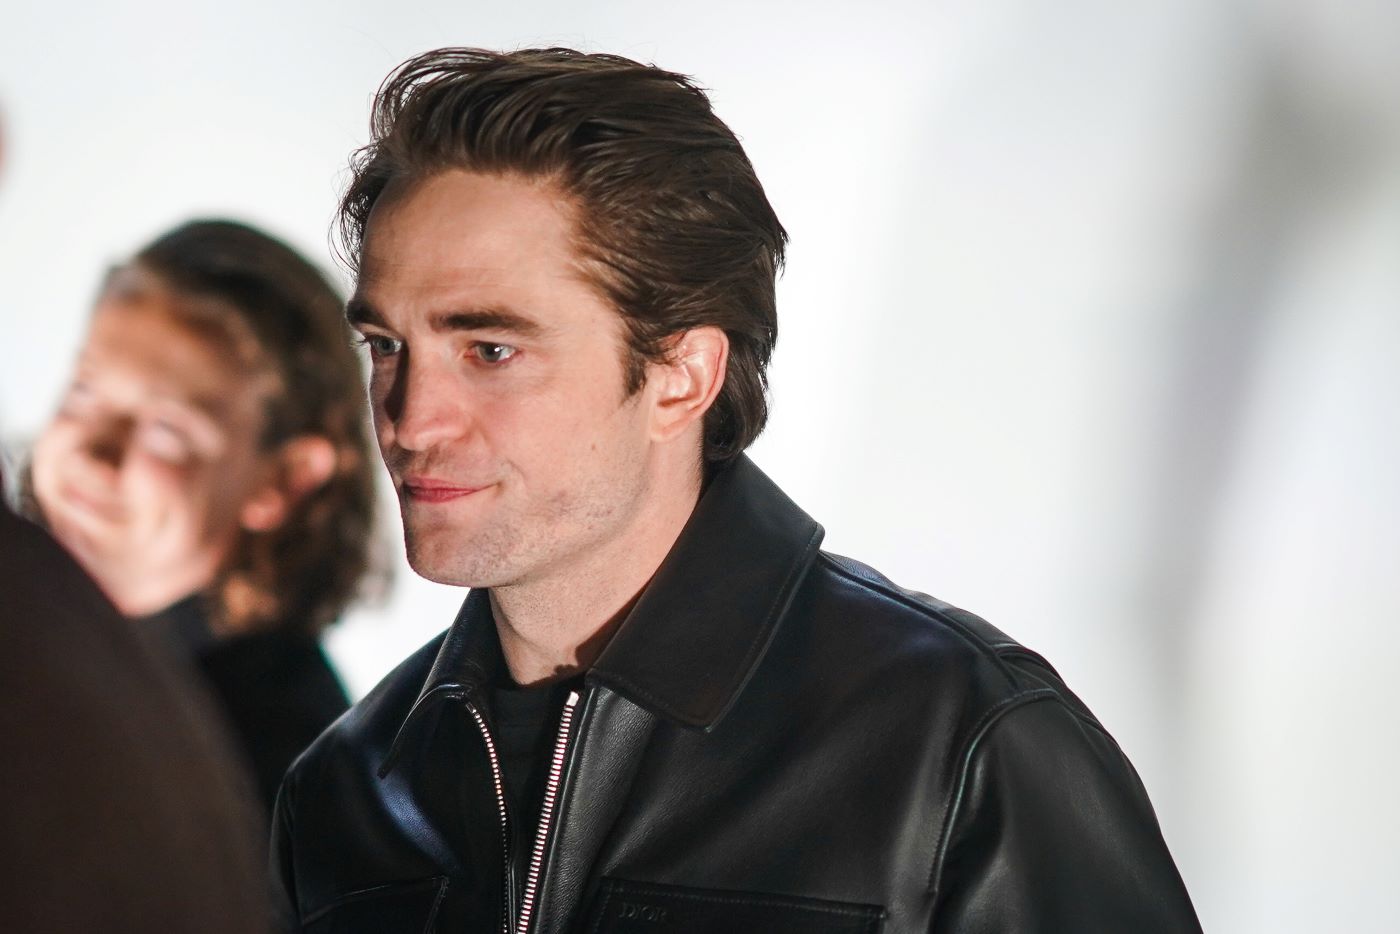 Robert Pattinson in a black leather jacket and black shirt against a white background.